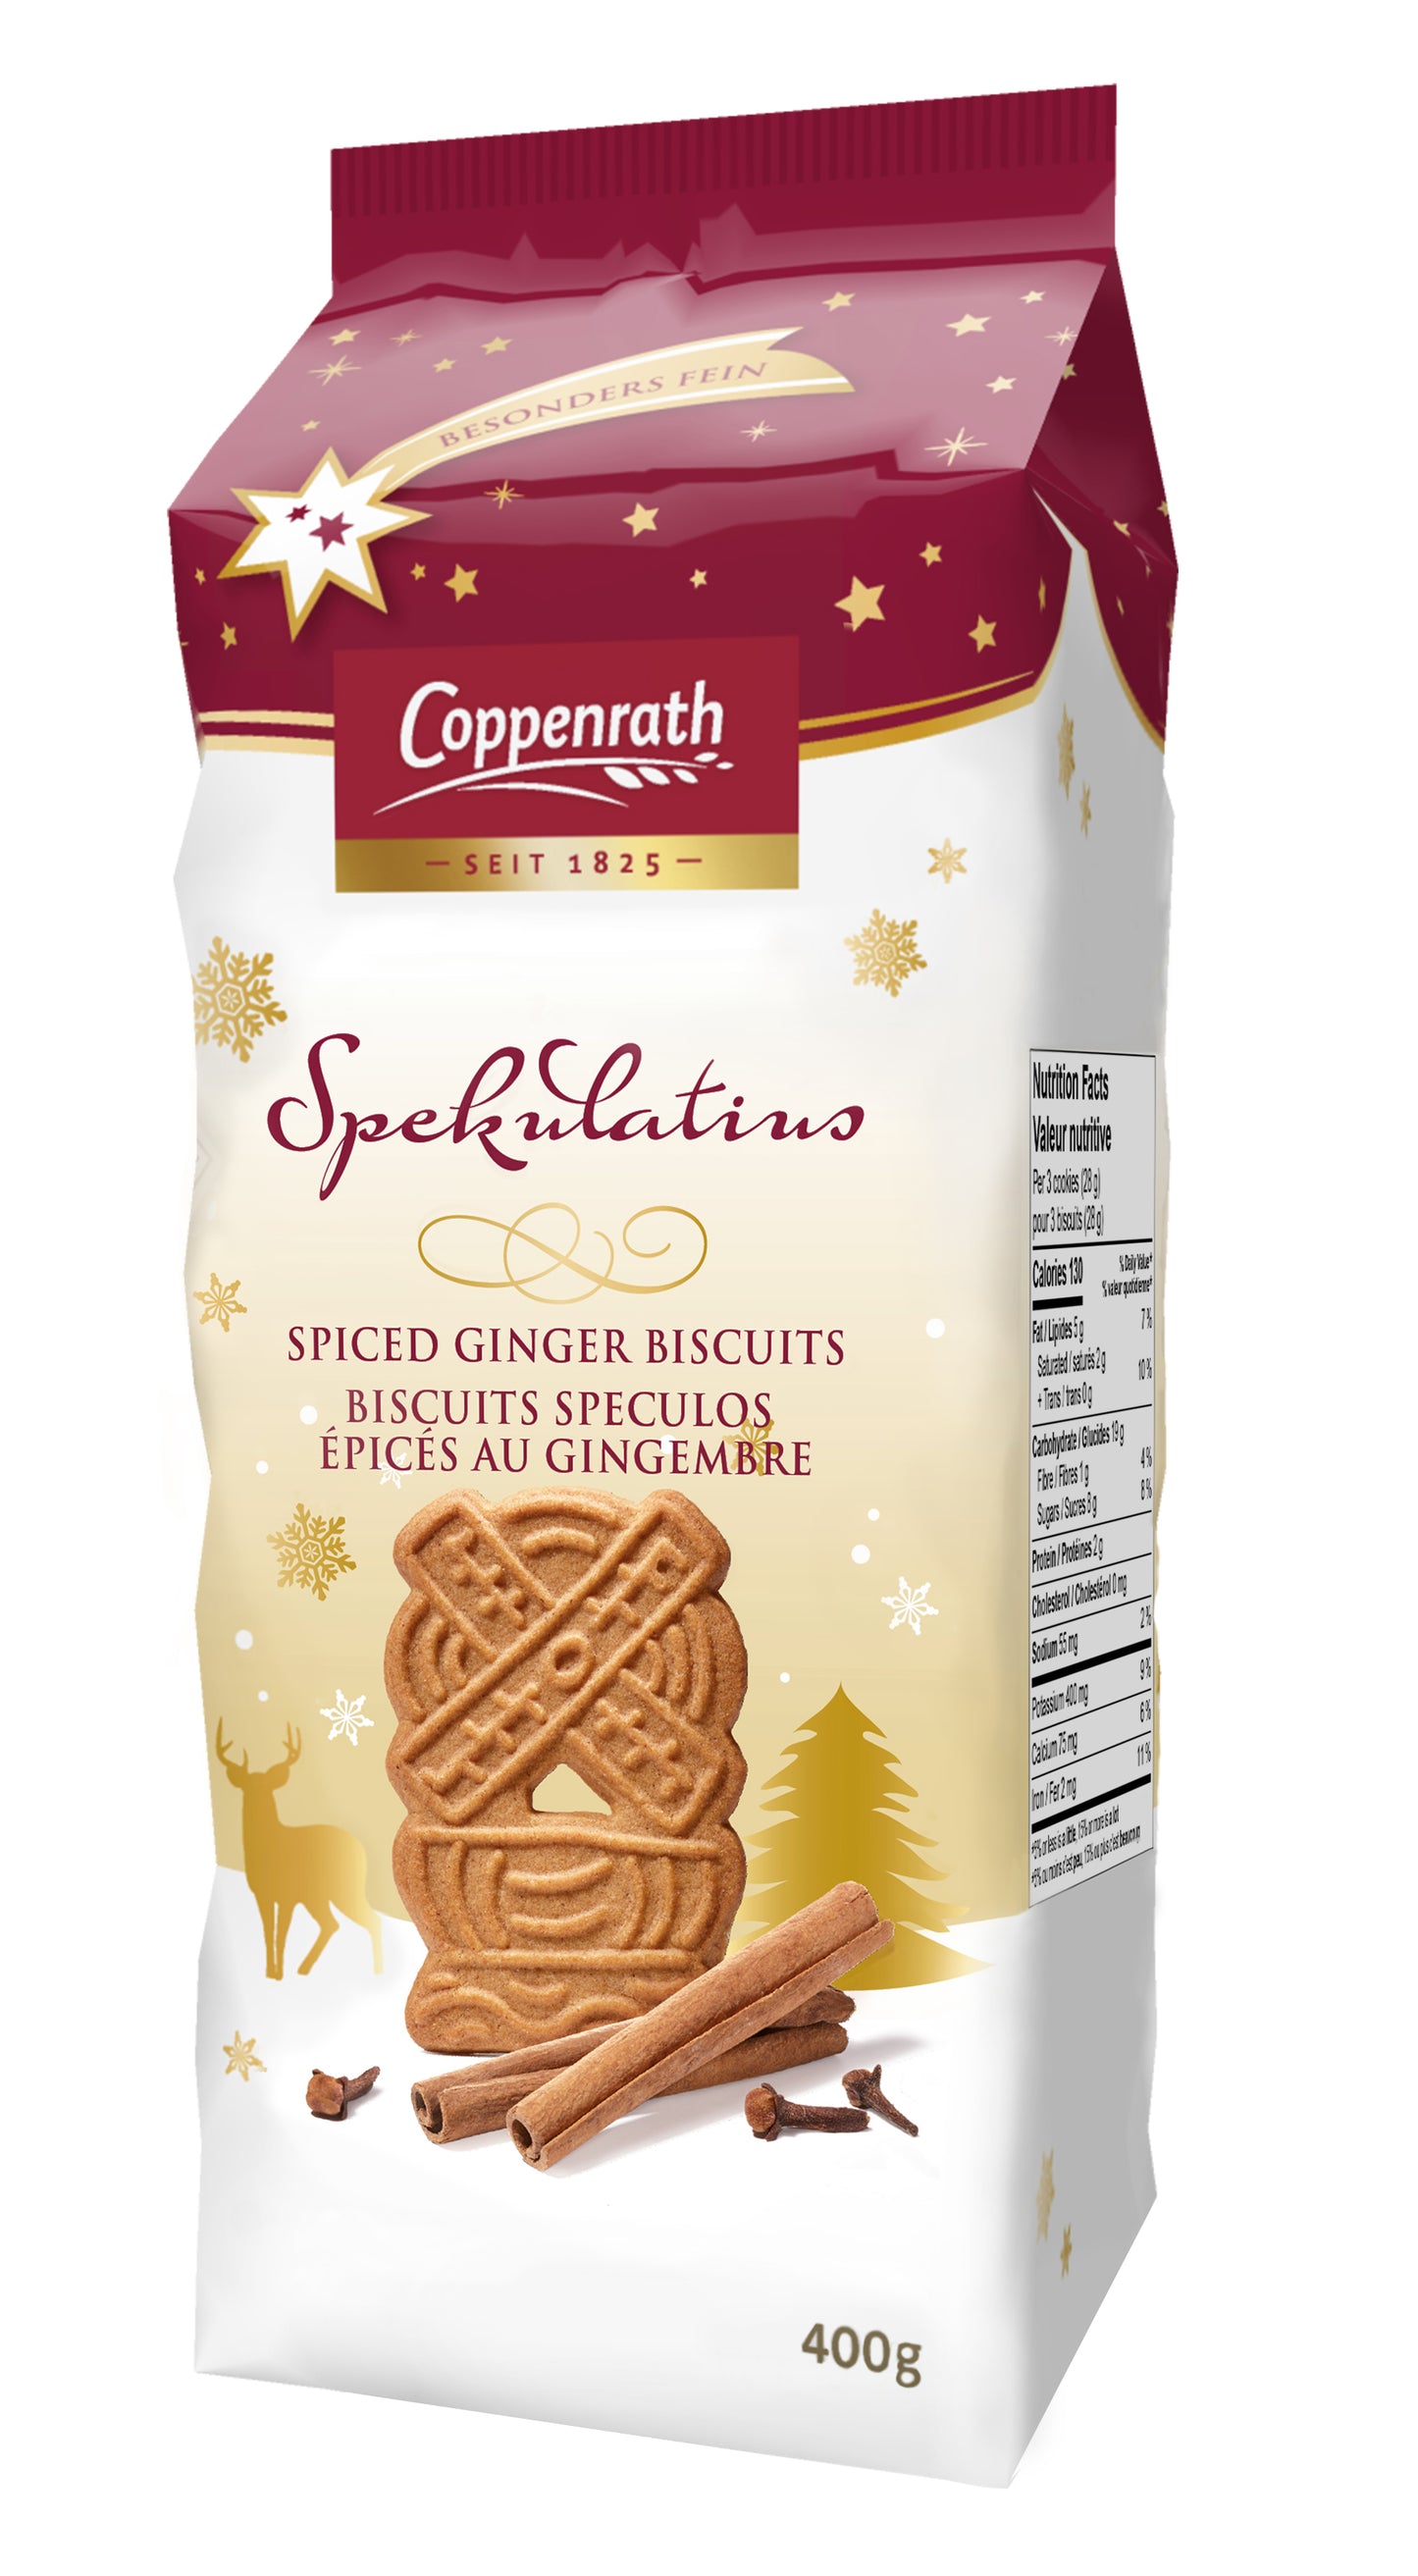 Spiced Ginger Biscuits